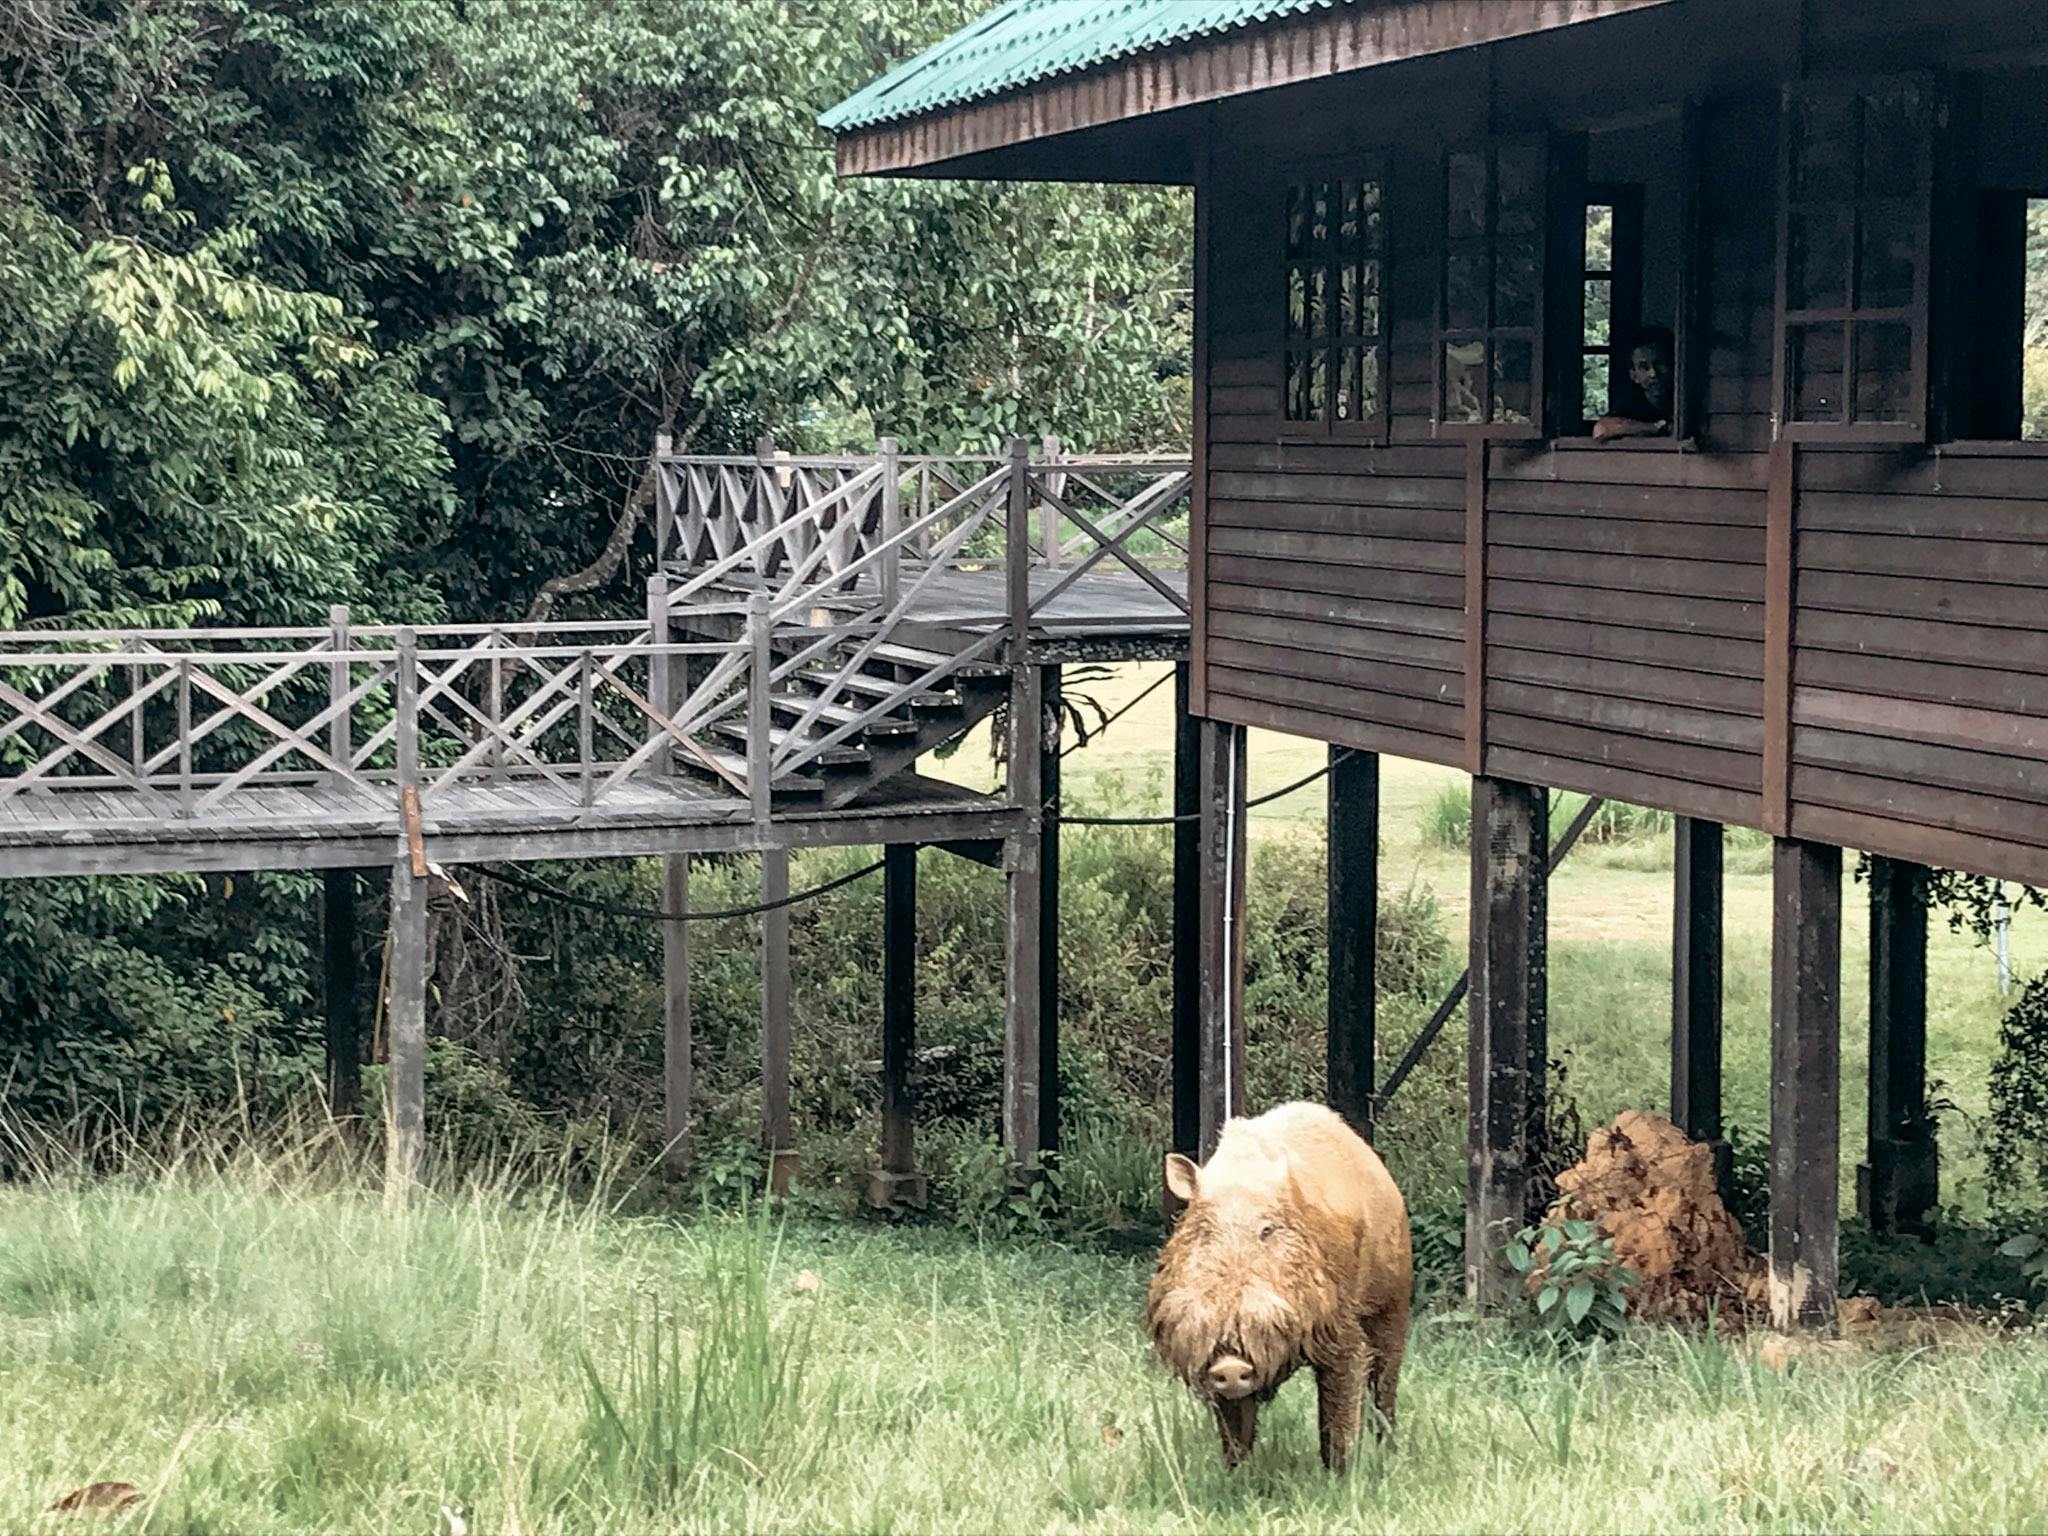 The huts at Maliau Basin Studies Centre are basic but comfortable, with lots of wild boar running about!